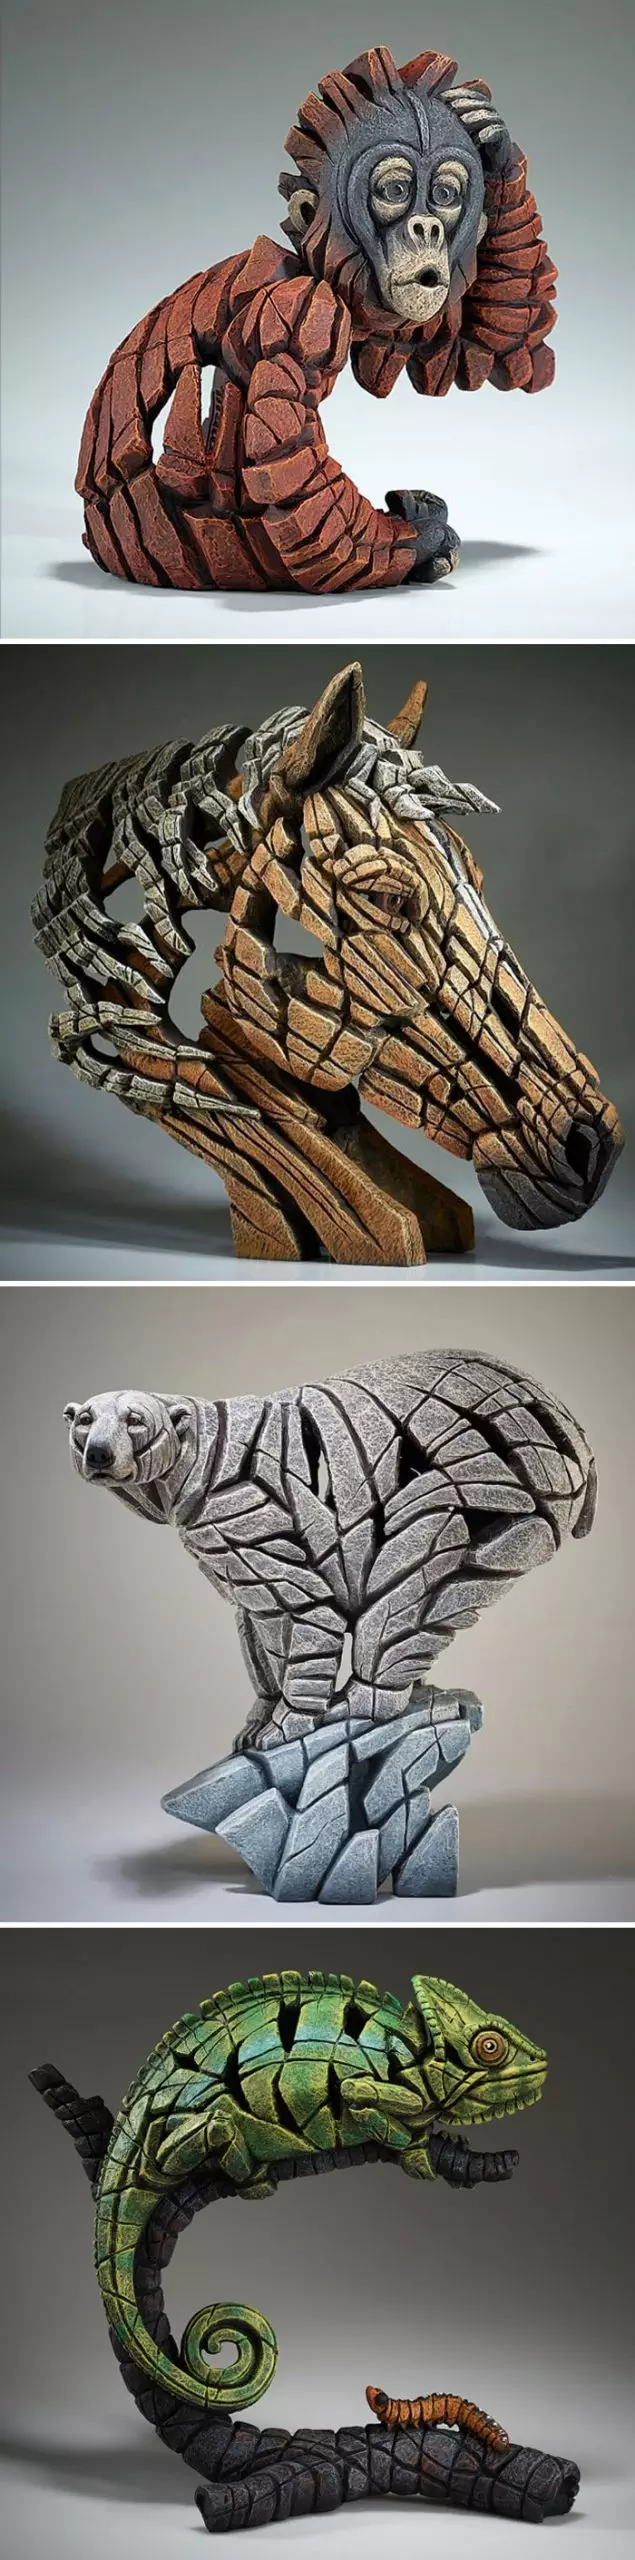 30 Amazing Pictures Of Sculptures That Are Both Breathtaking And Unbelievable